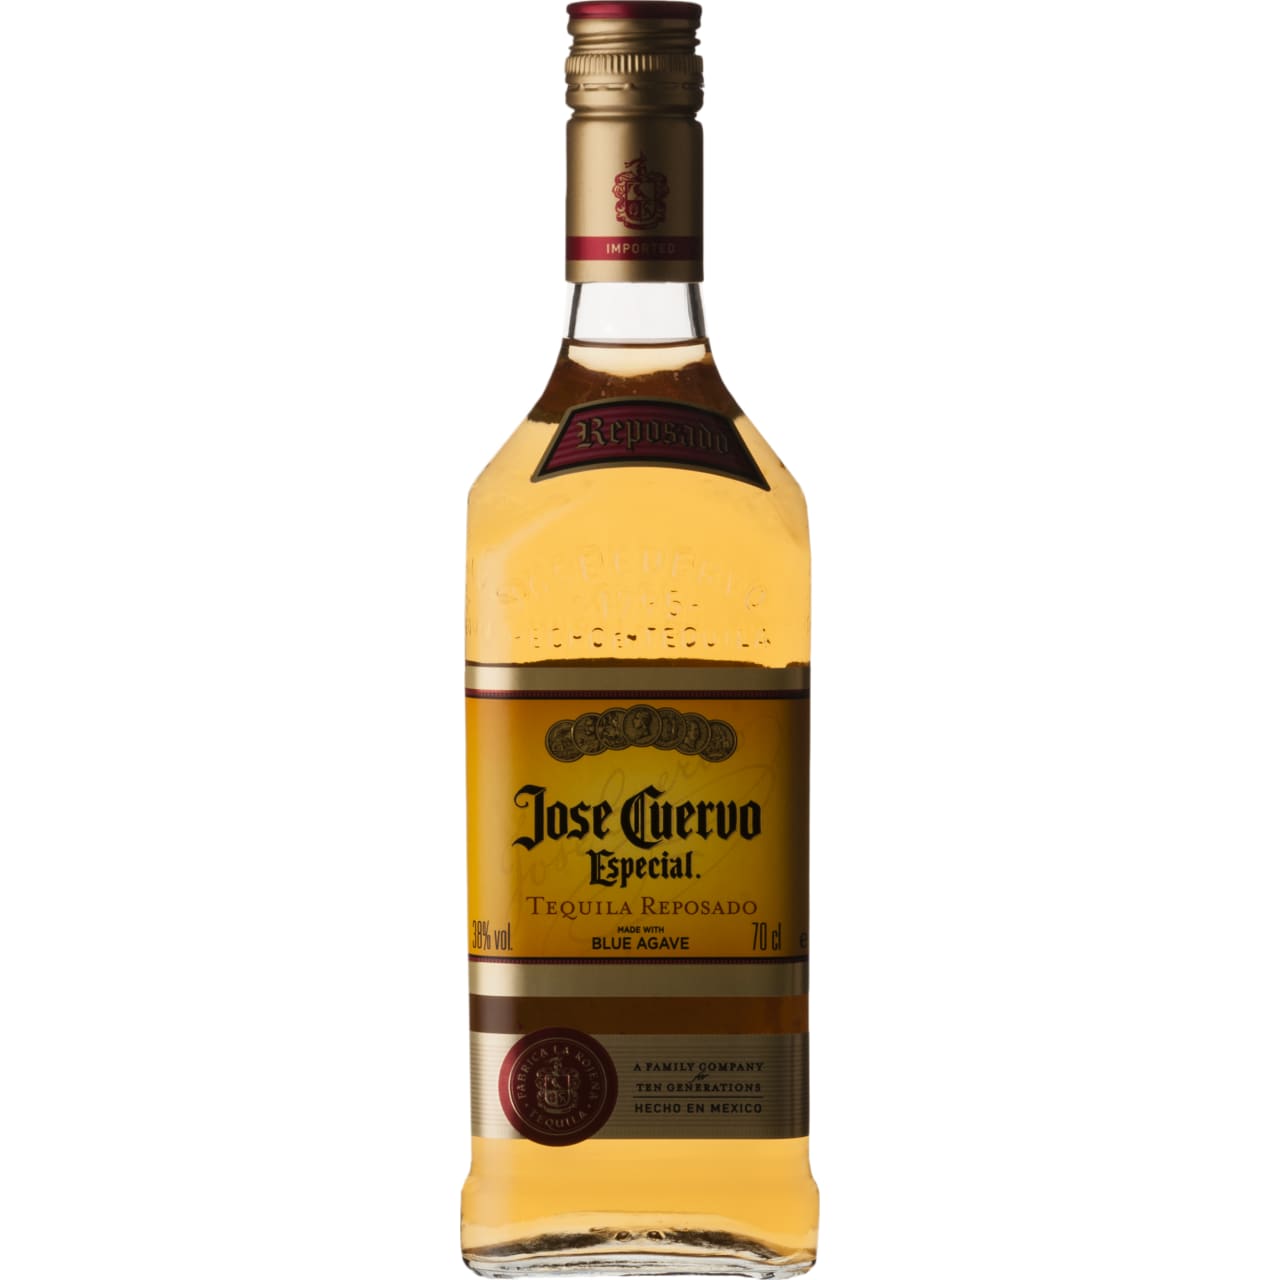 This gold tequila from Jose Cuervo is made from Blue Agave and a blend of Reposado and other high-quality aged Cuervo tequilas.